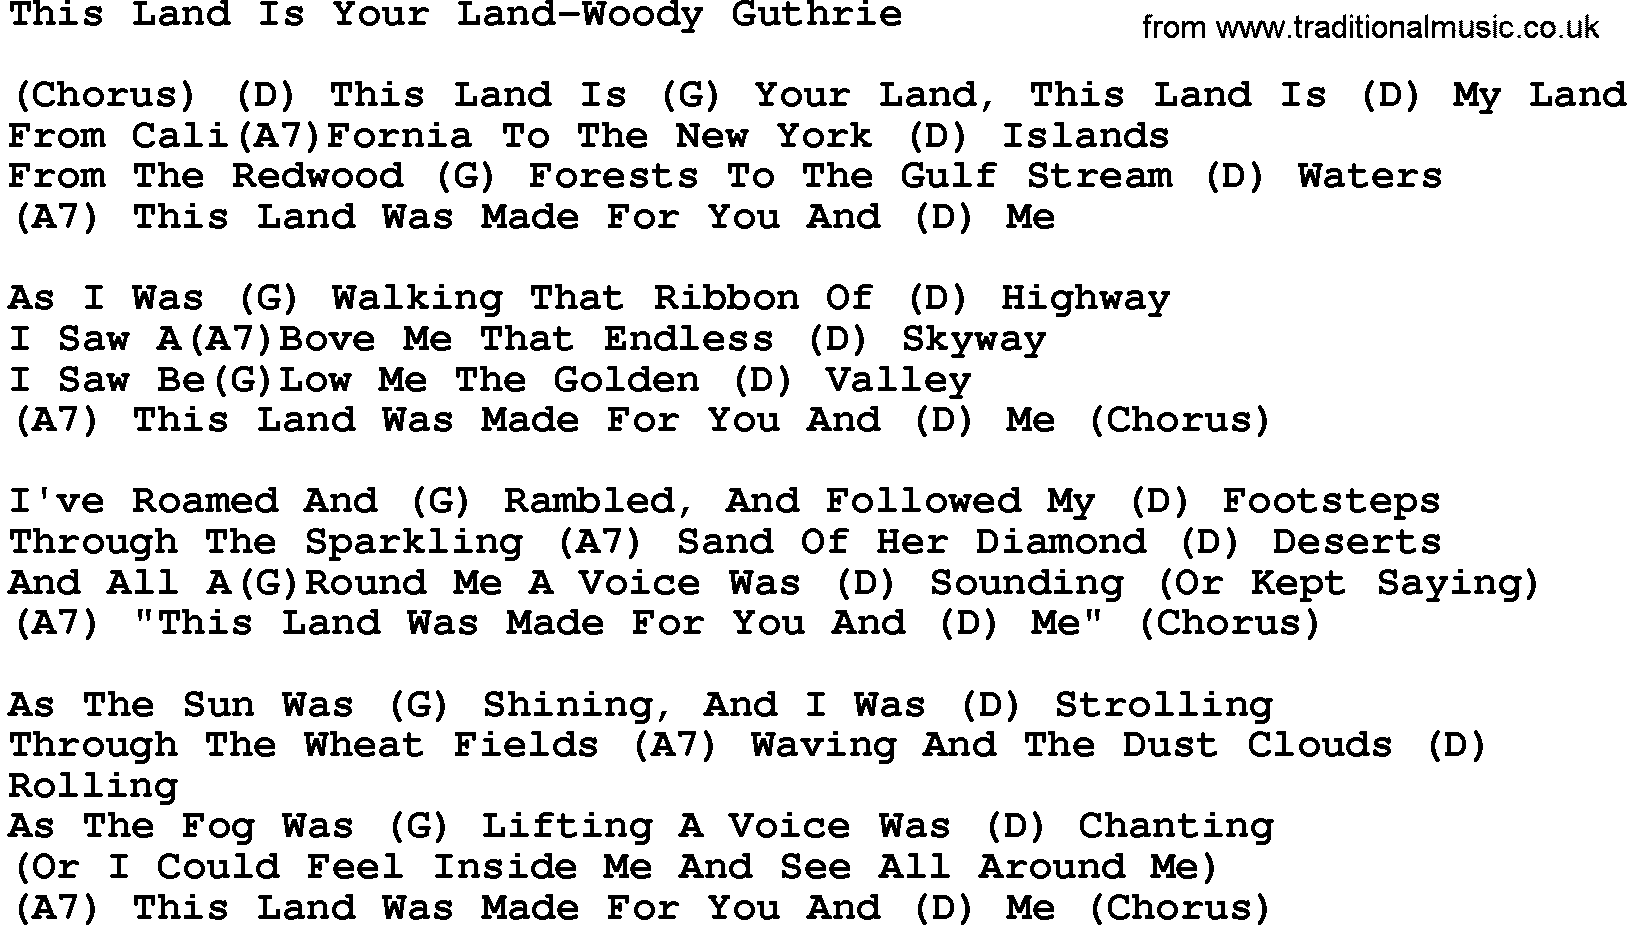 Country music song: This Land Is Your Land-Woody Guthrie lyrics and chords